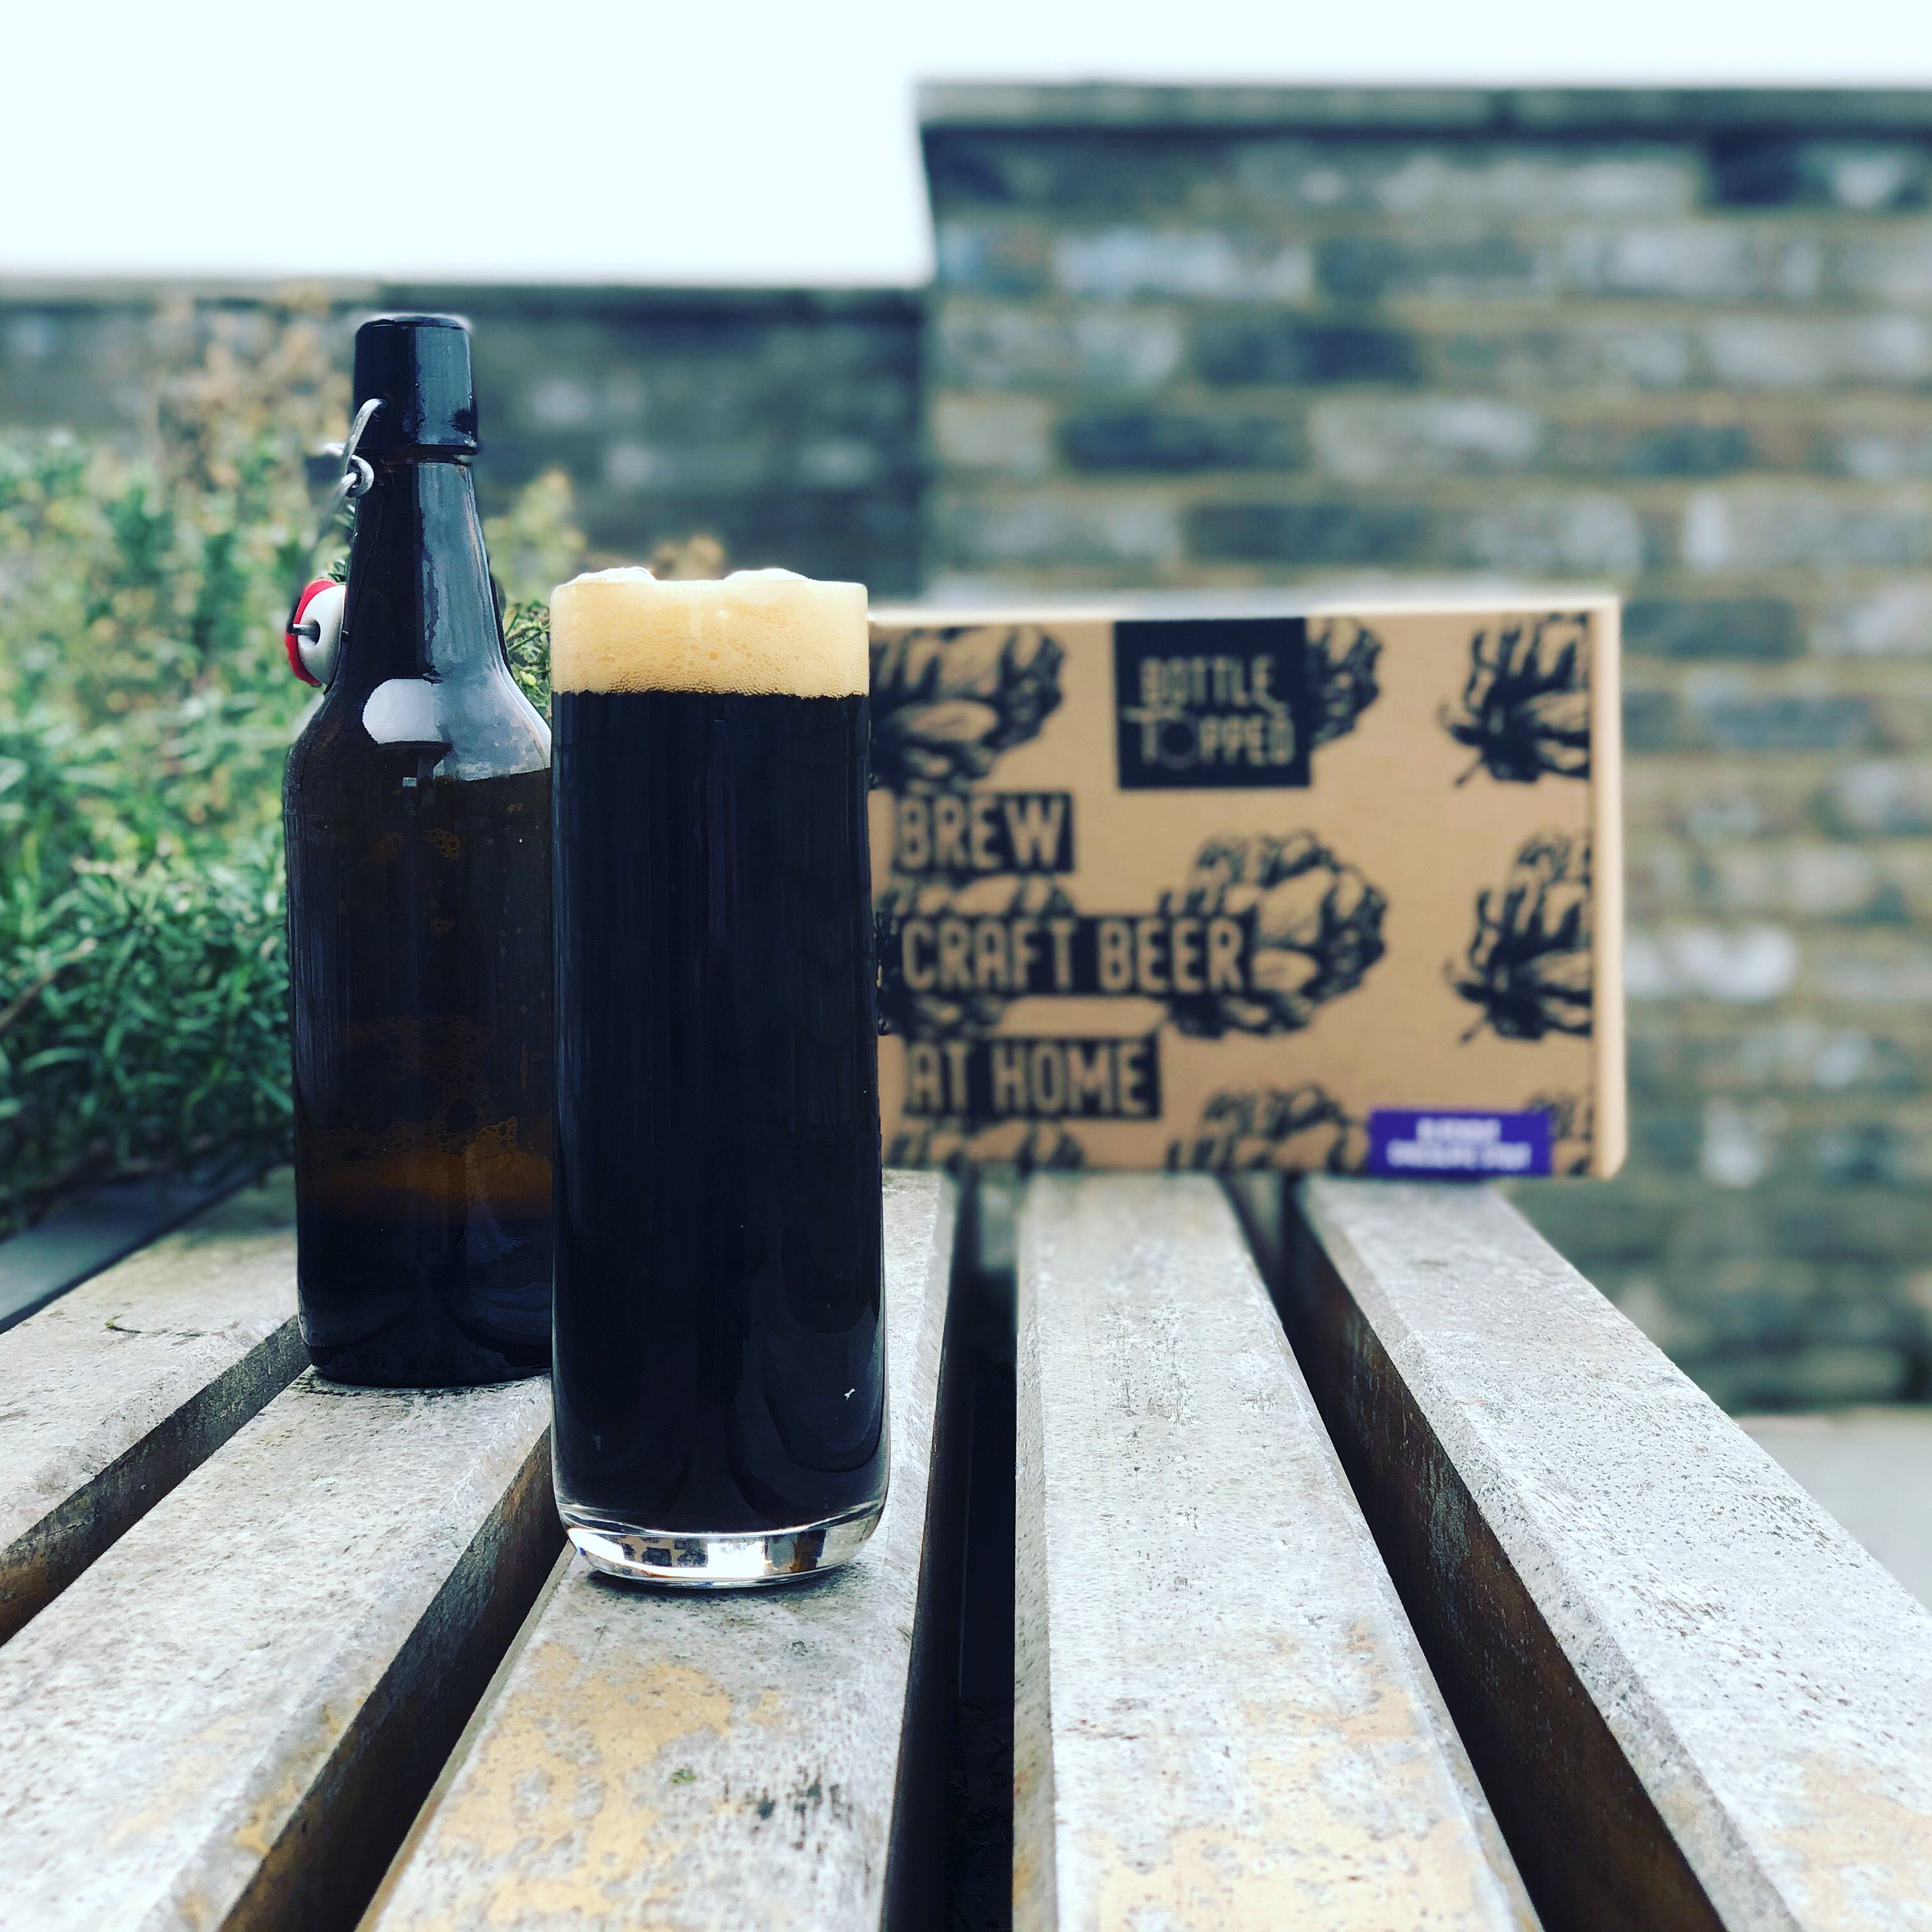 A glass of home brewed Bottle Topped Blackout Chocolate Stout